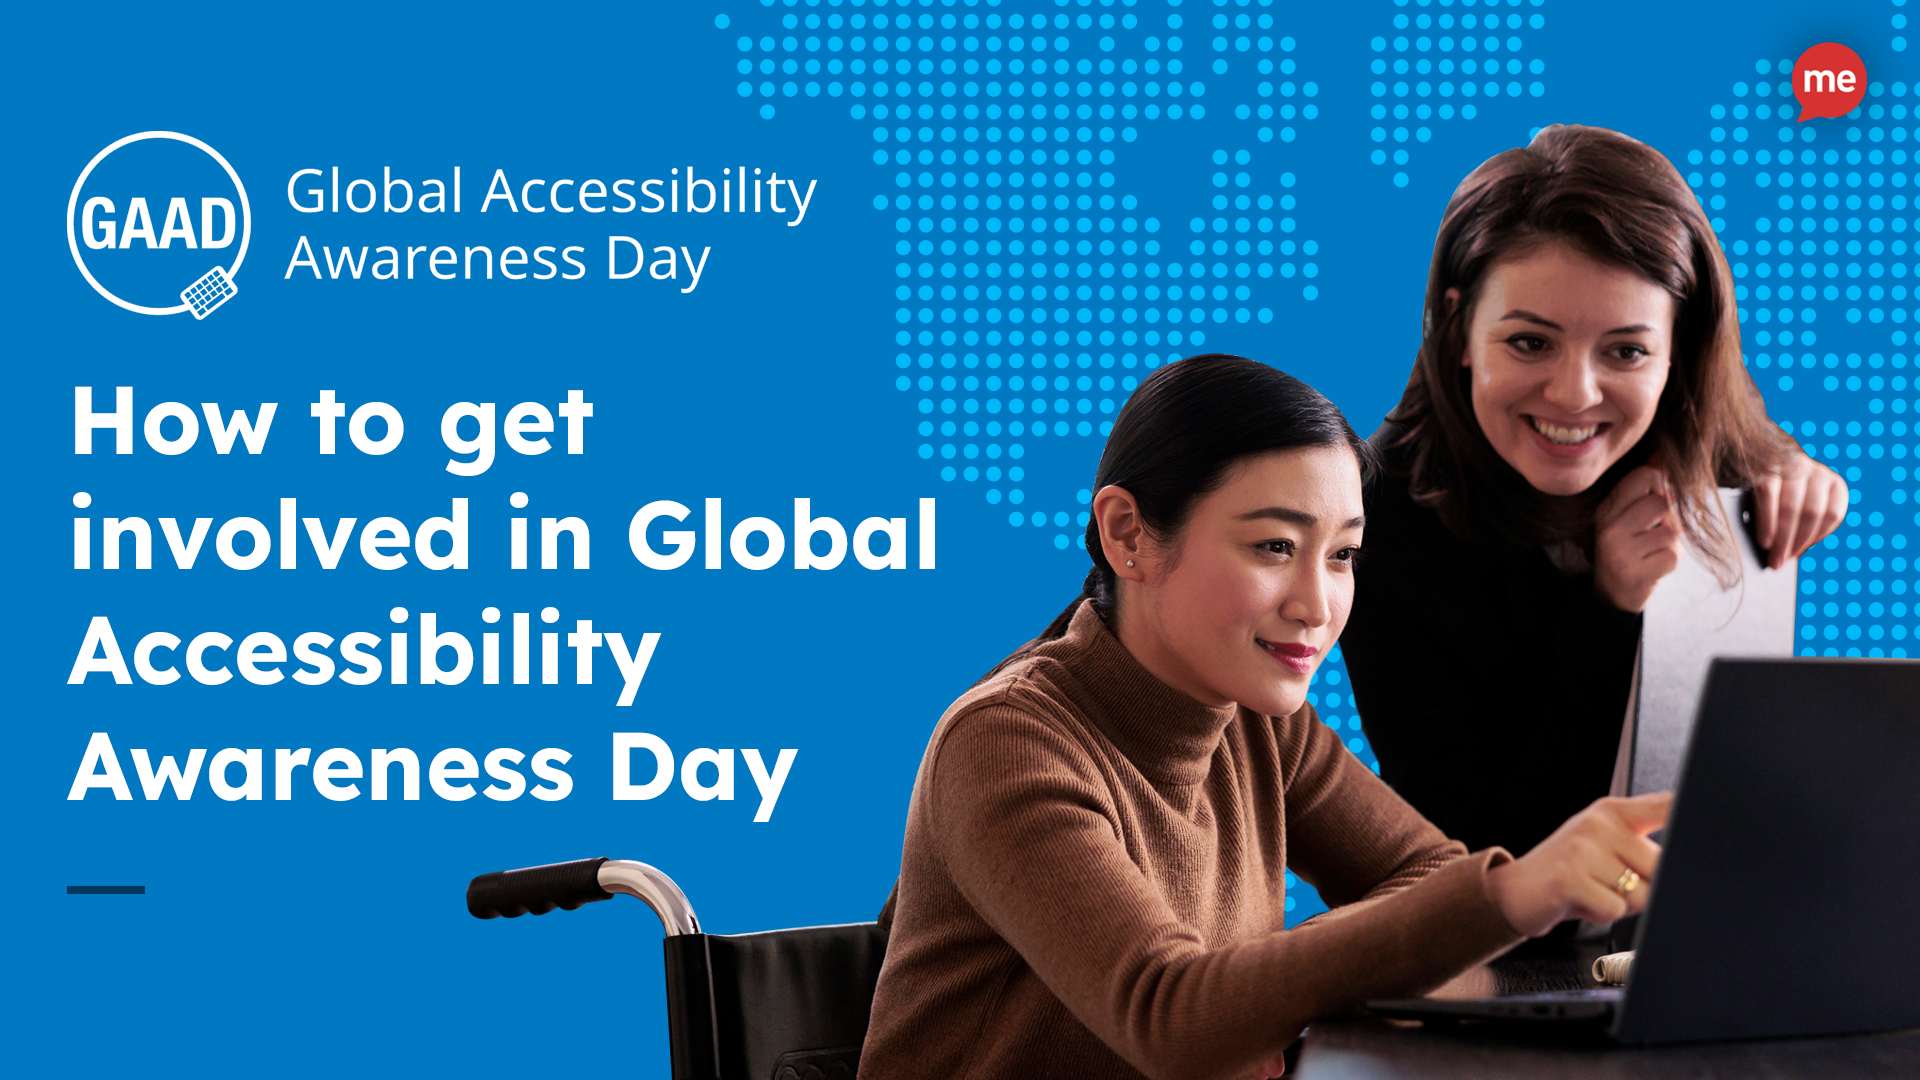 Image of a young woman in a wheelchair looking at computer with another woman standing next to her. Text reads How to get involved in Global Accessibility Awareness Day with the GAAD logo